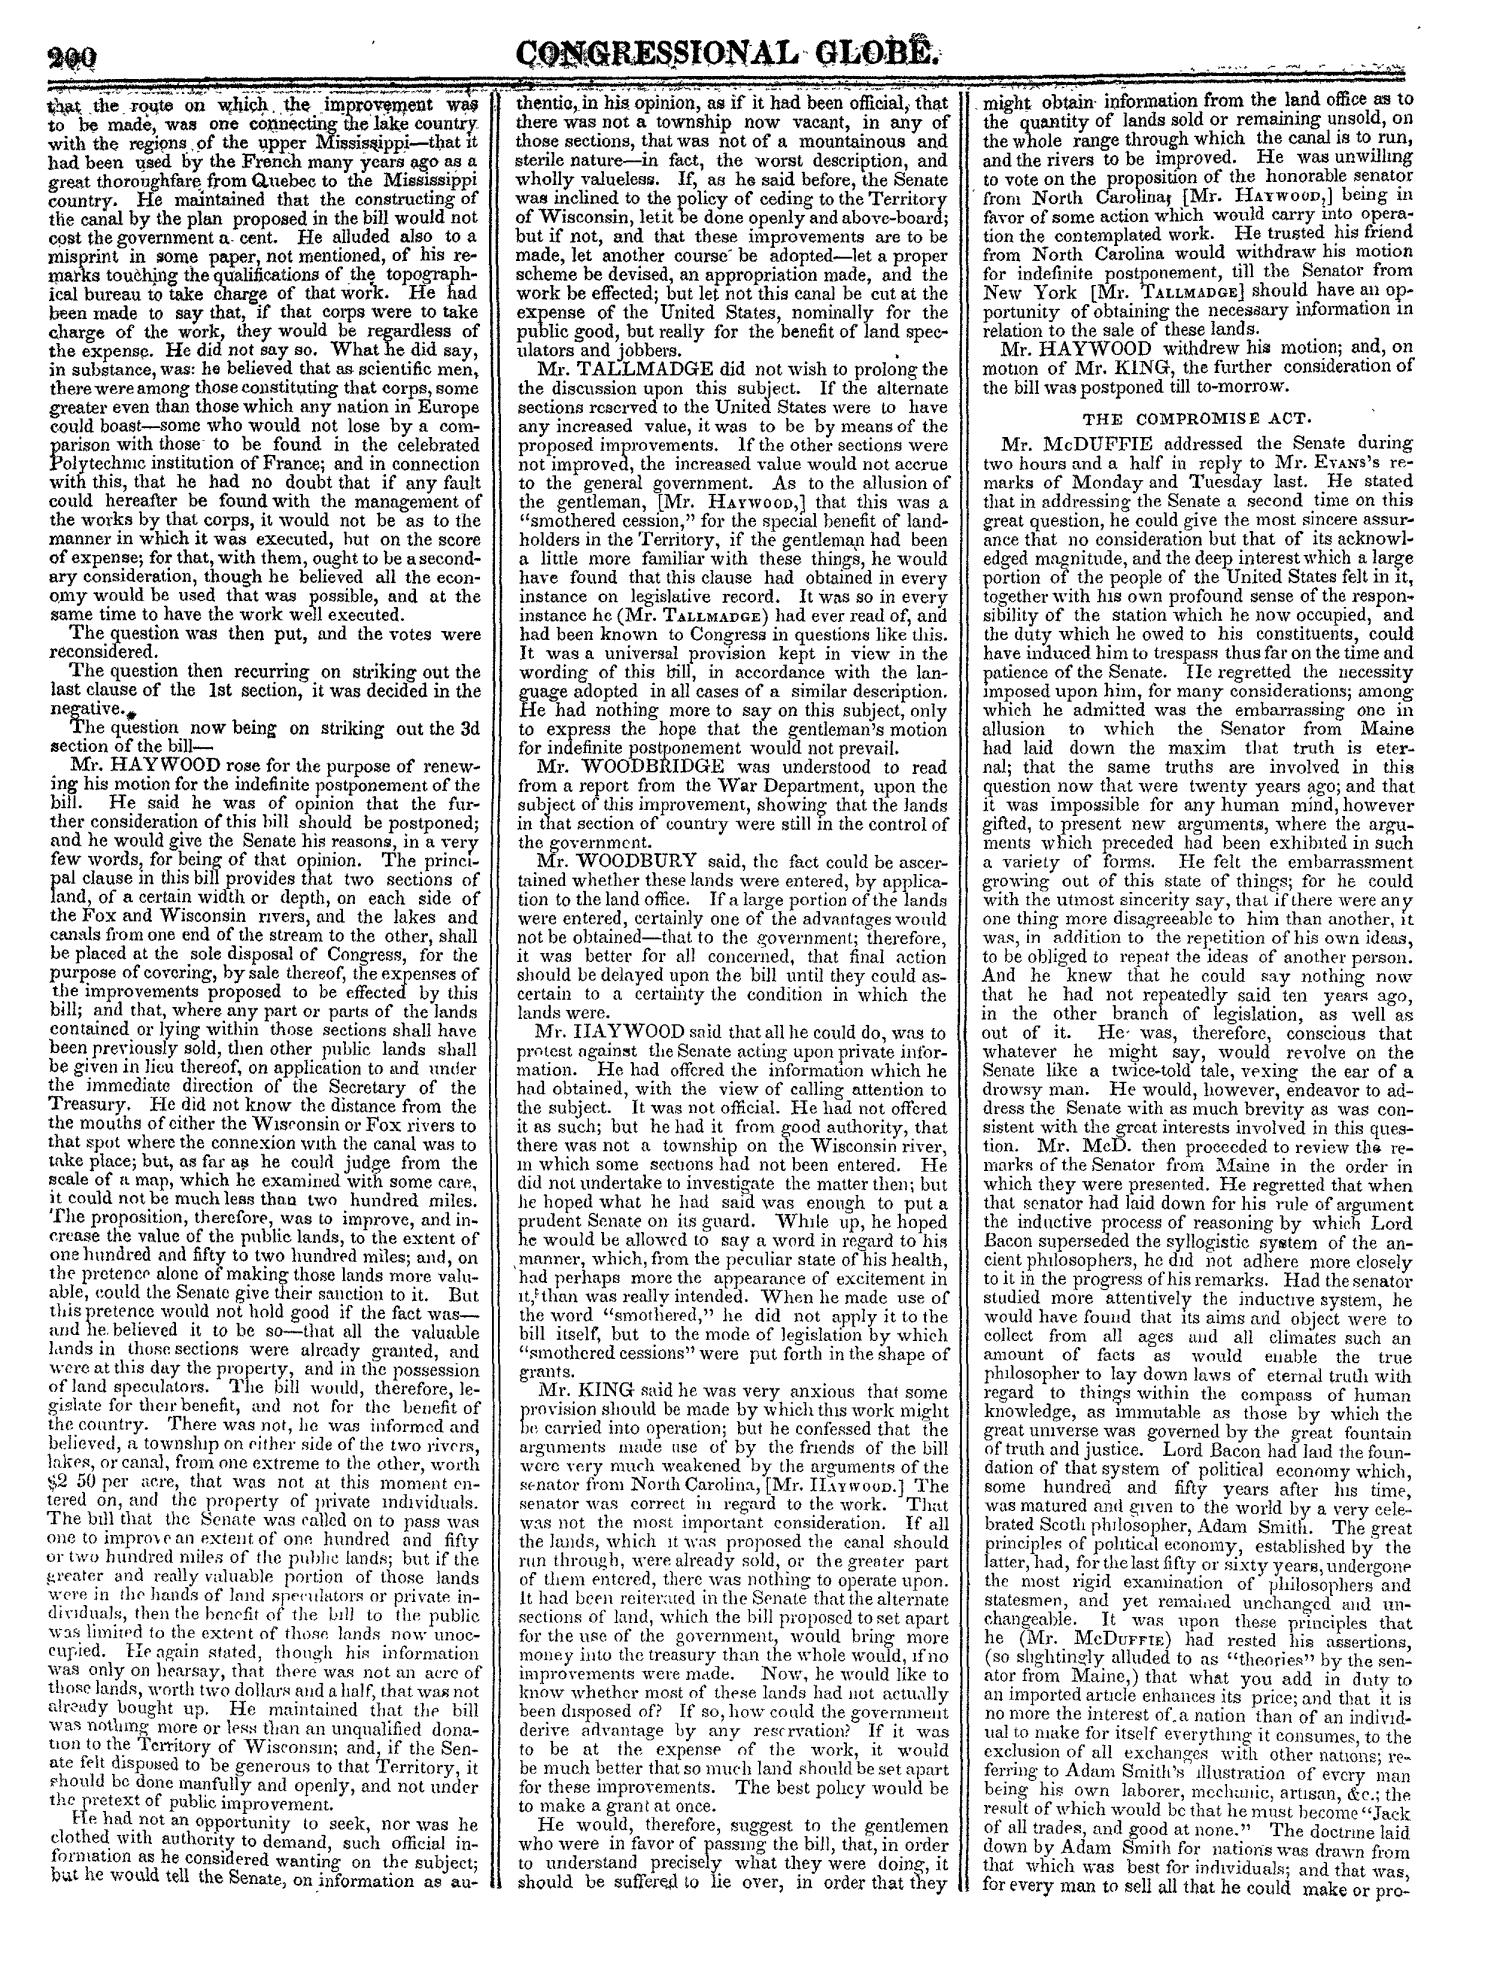 The Congressional Globe, Volume 13, Part 1: Twenty-Eighth Congress, First Session
                                                
                                                    200
                                                